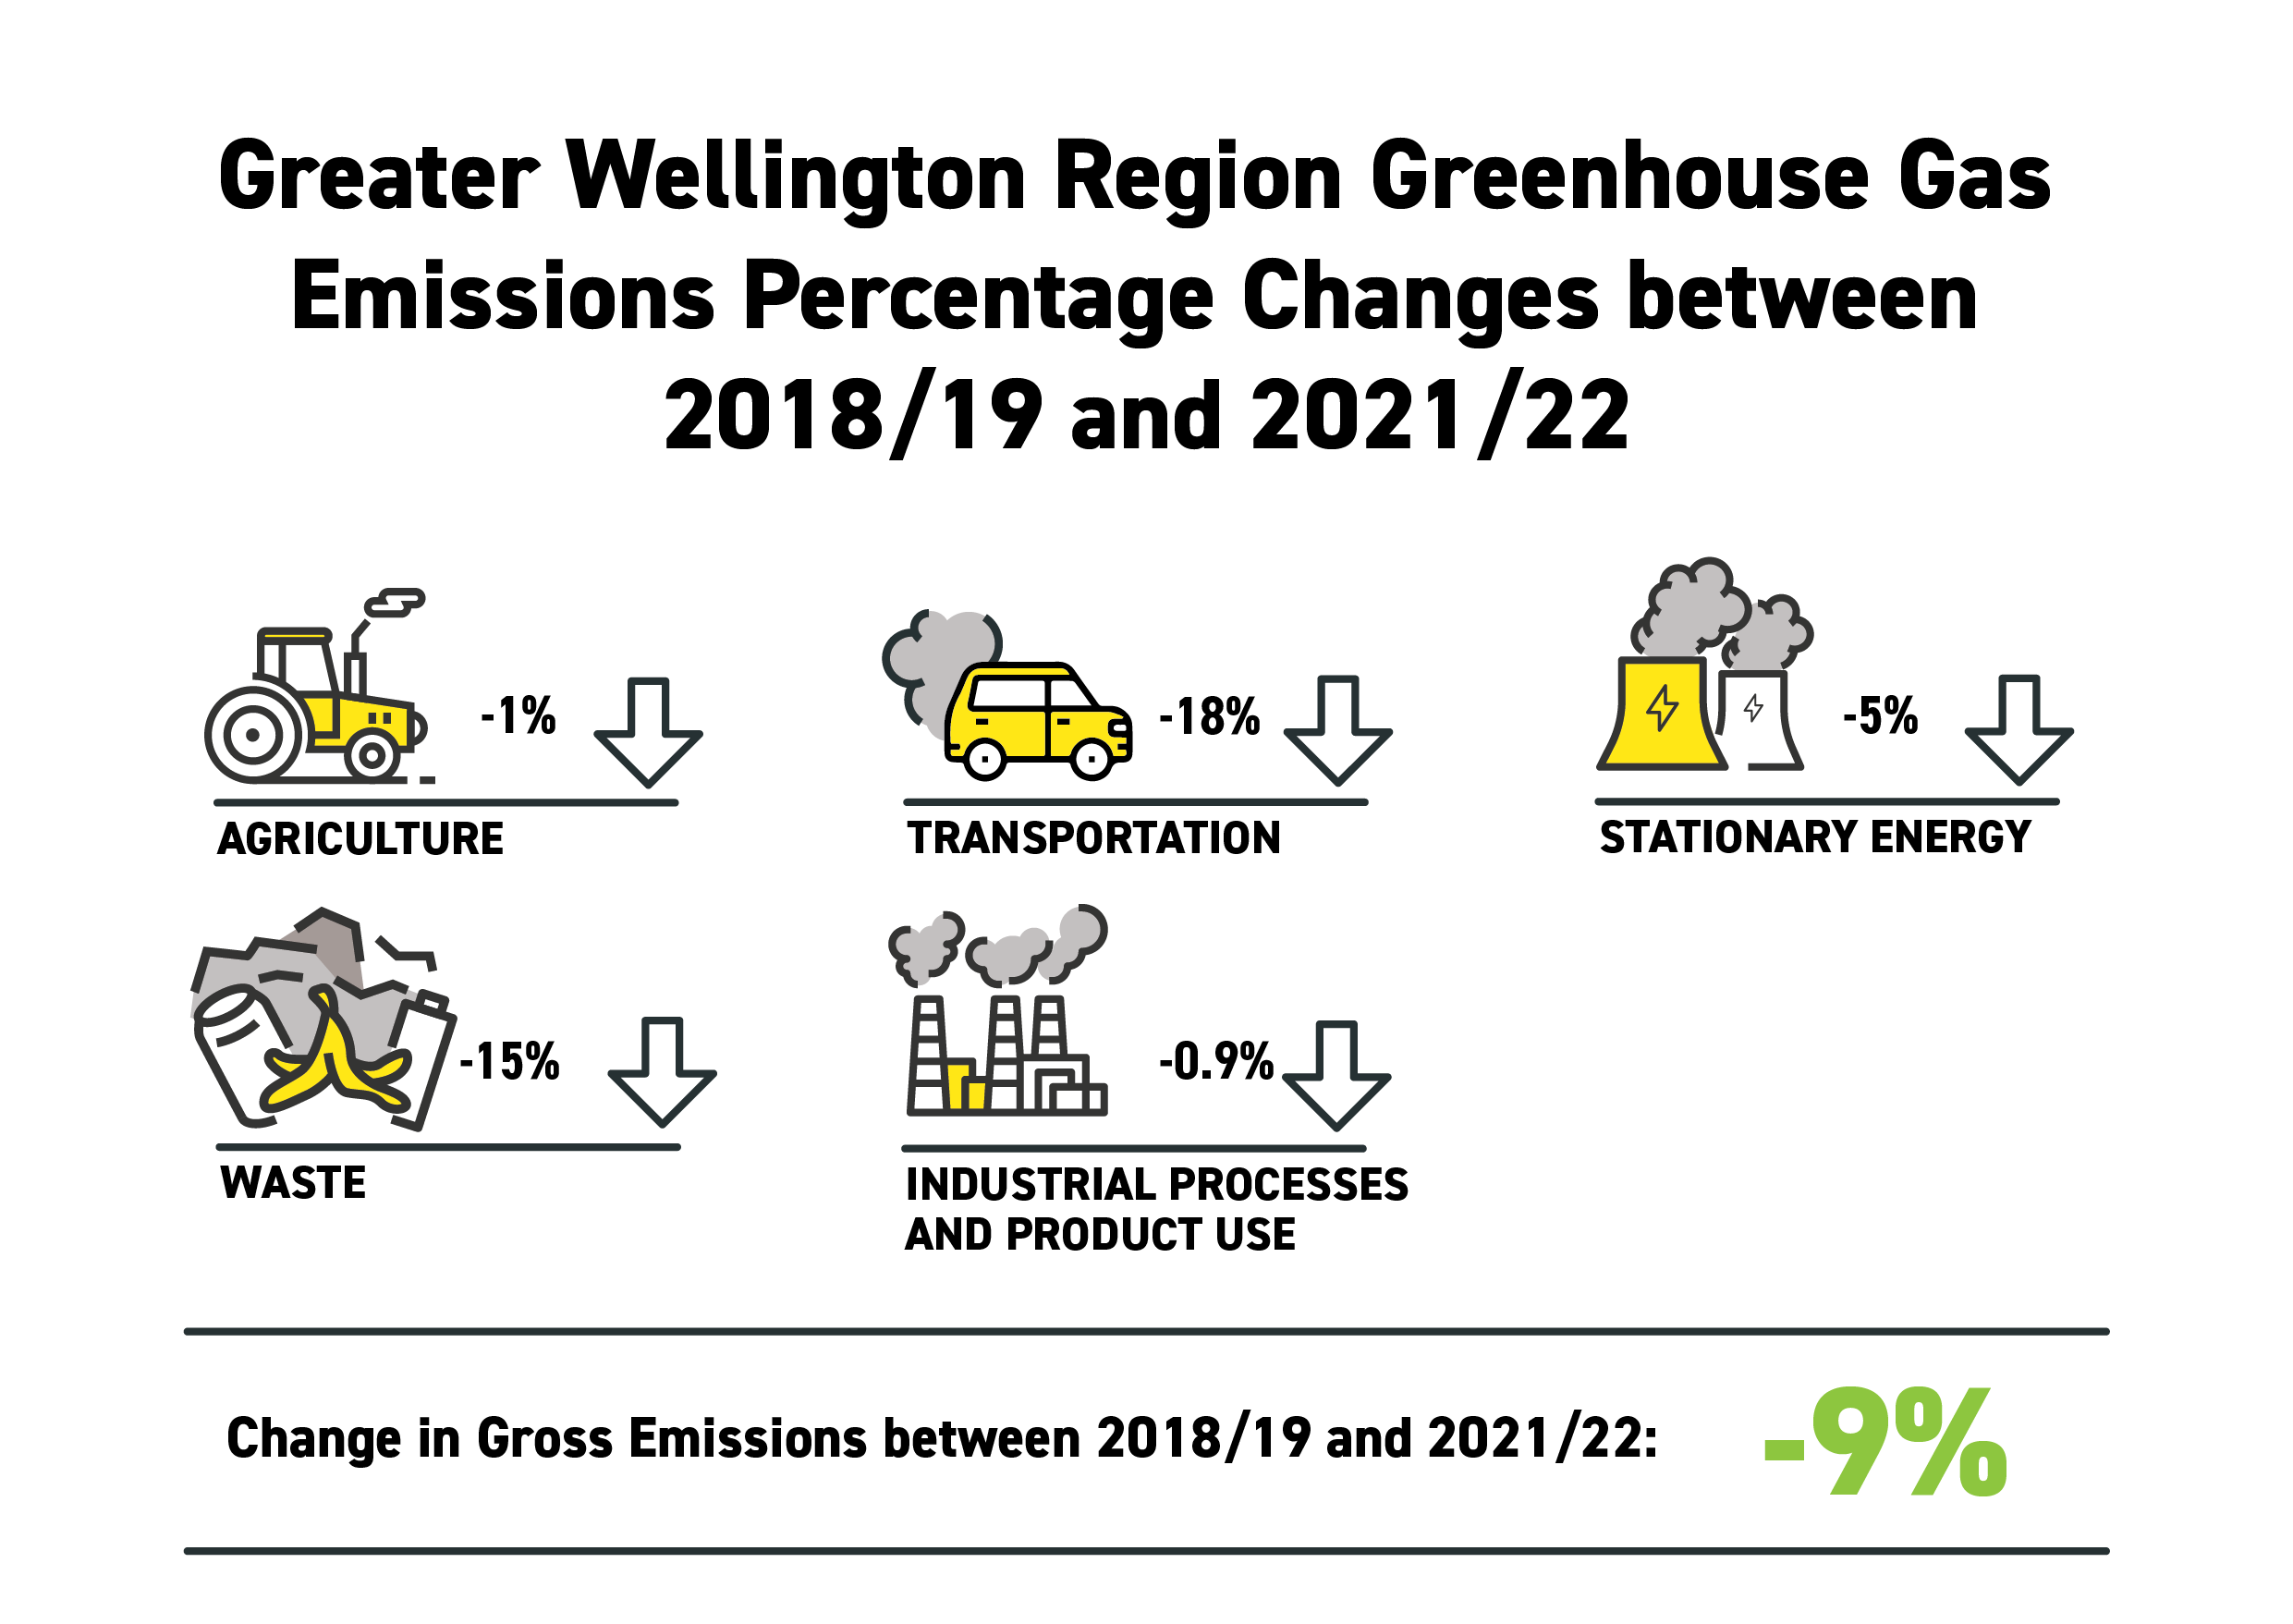 Infographic showing the Greater Wellington Region greenhouse gas emissions percentage changes between 2018/19 and 2021/22. The gross change is -9%.